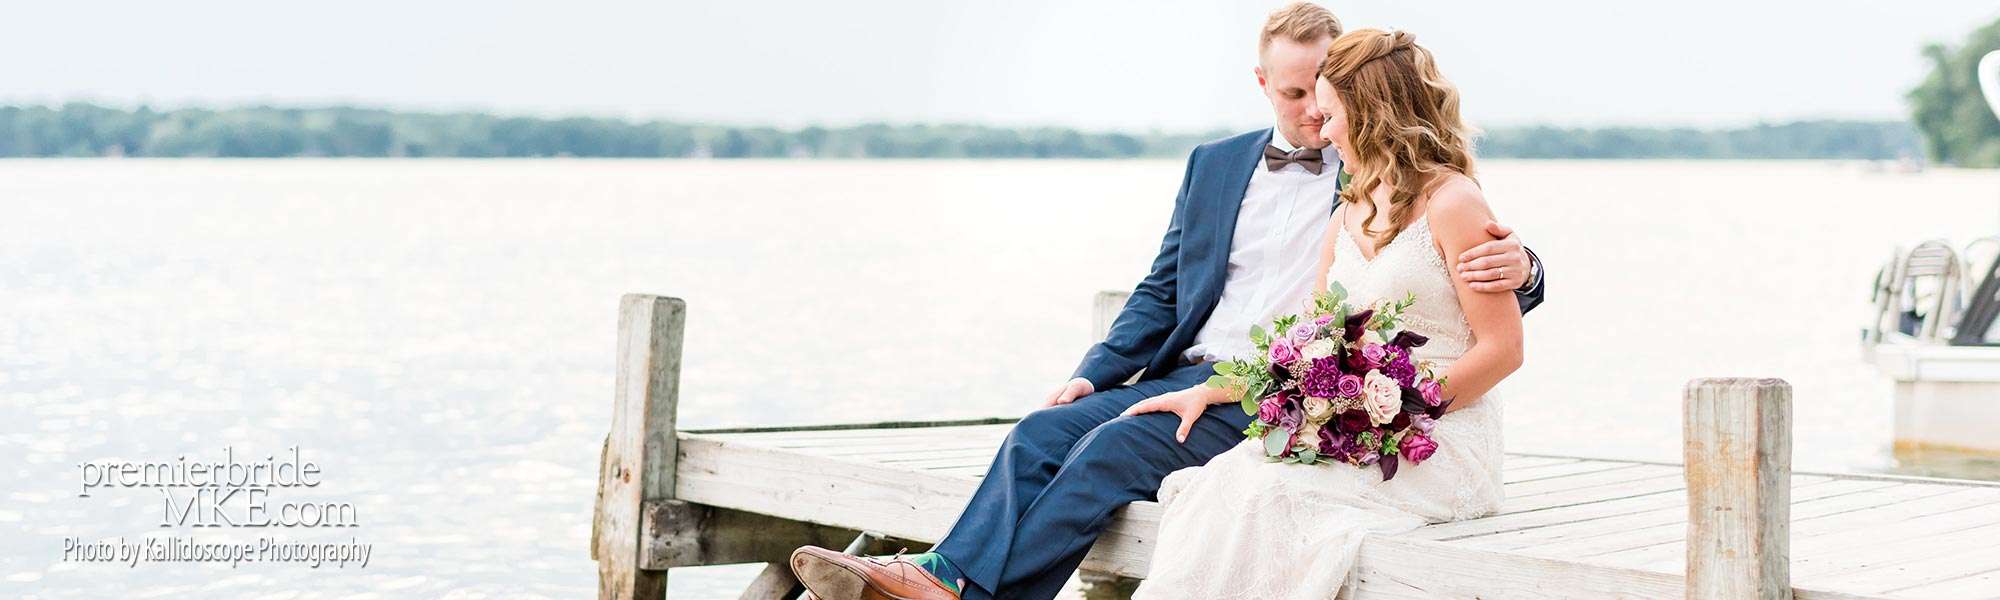 Anna and Chad marry at Seven Seas on Lake Nagawicka in Delafield WI